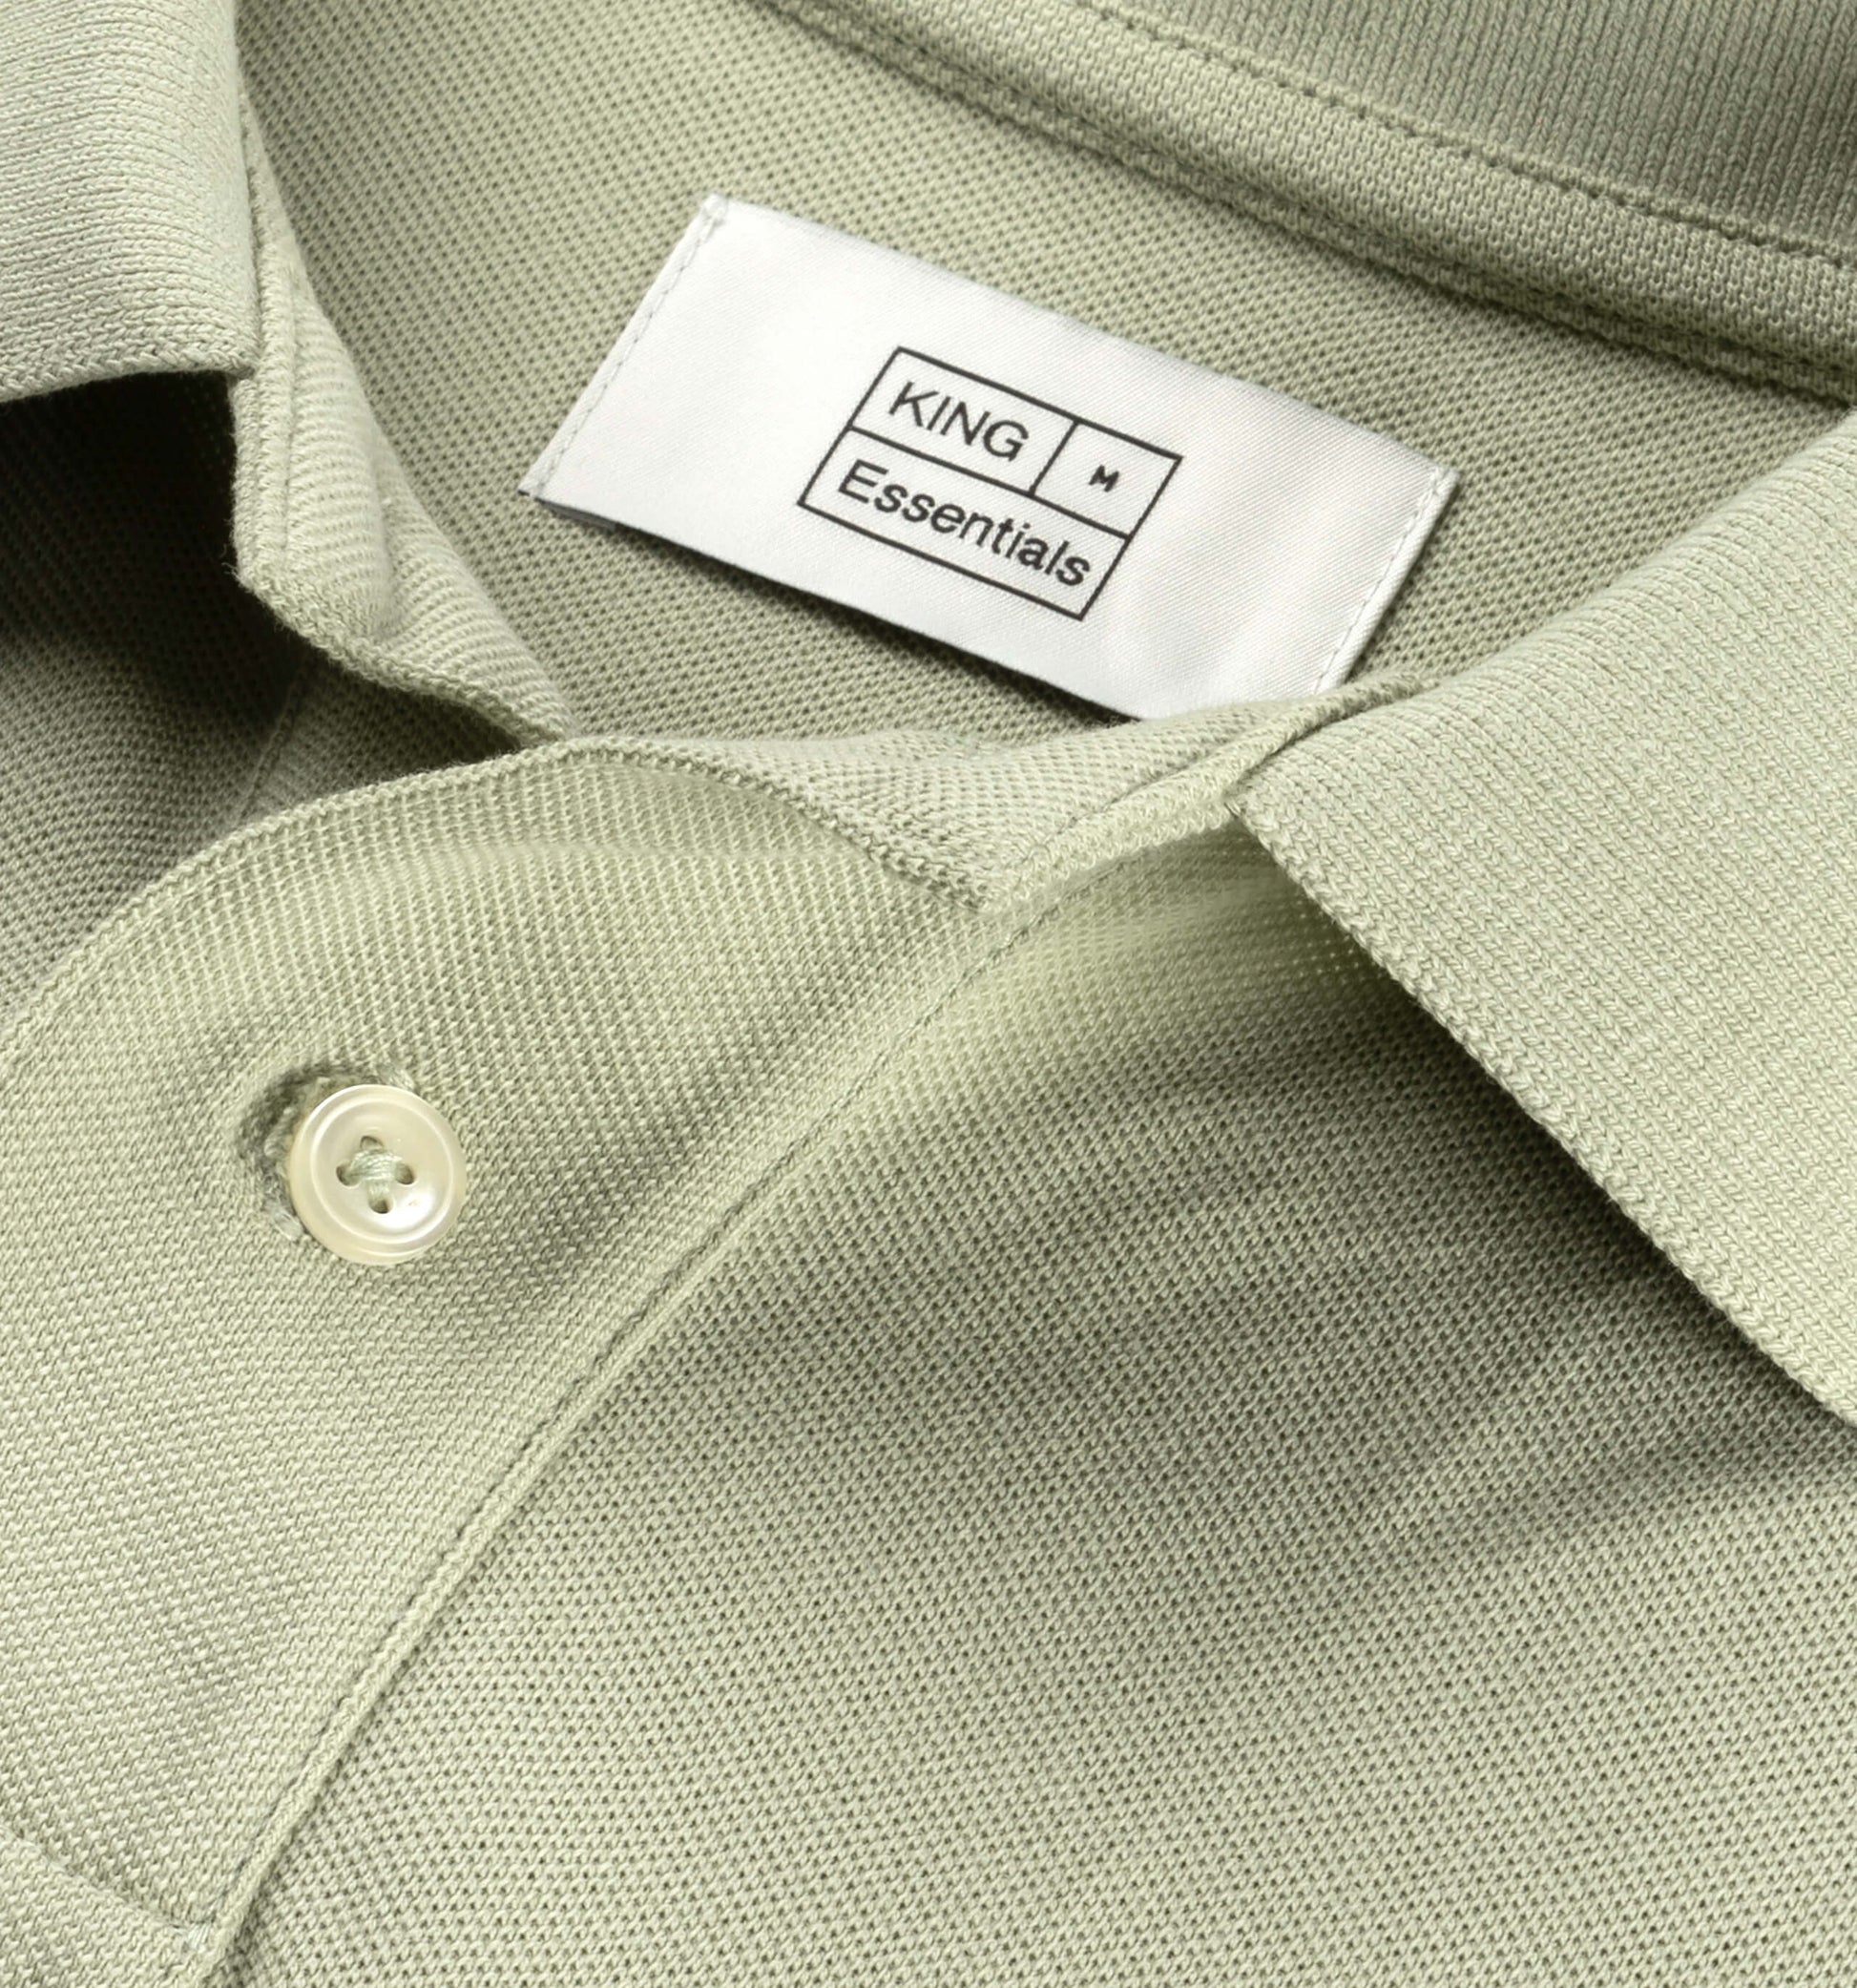 The Rene - Pique Polo In Sage From King Essentials